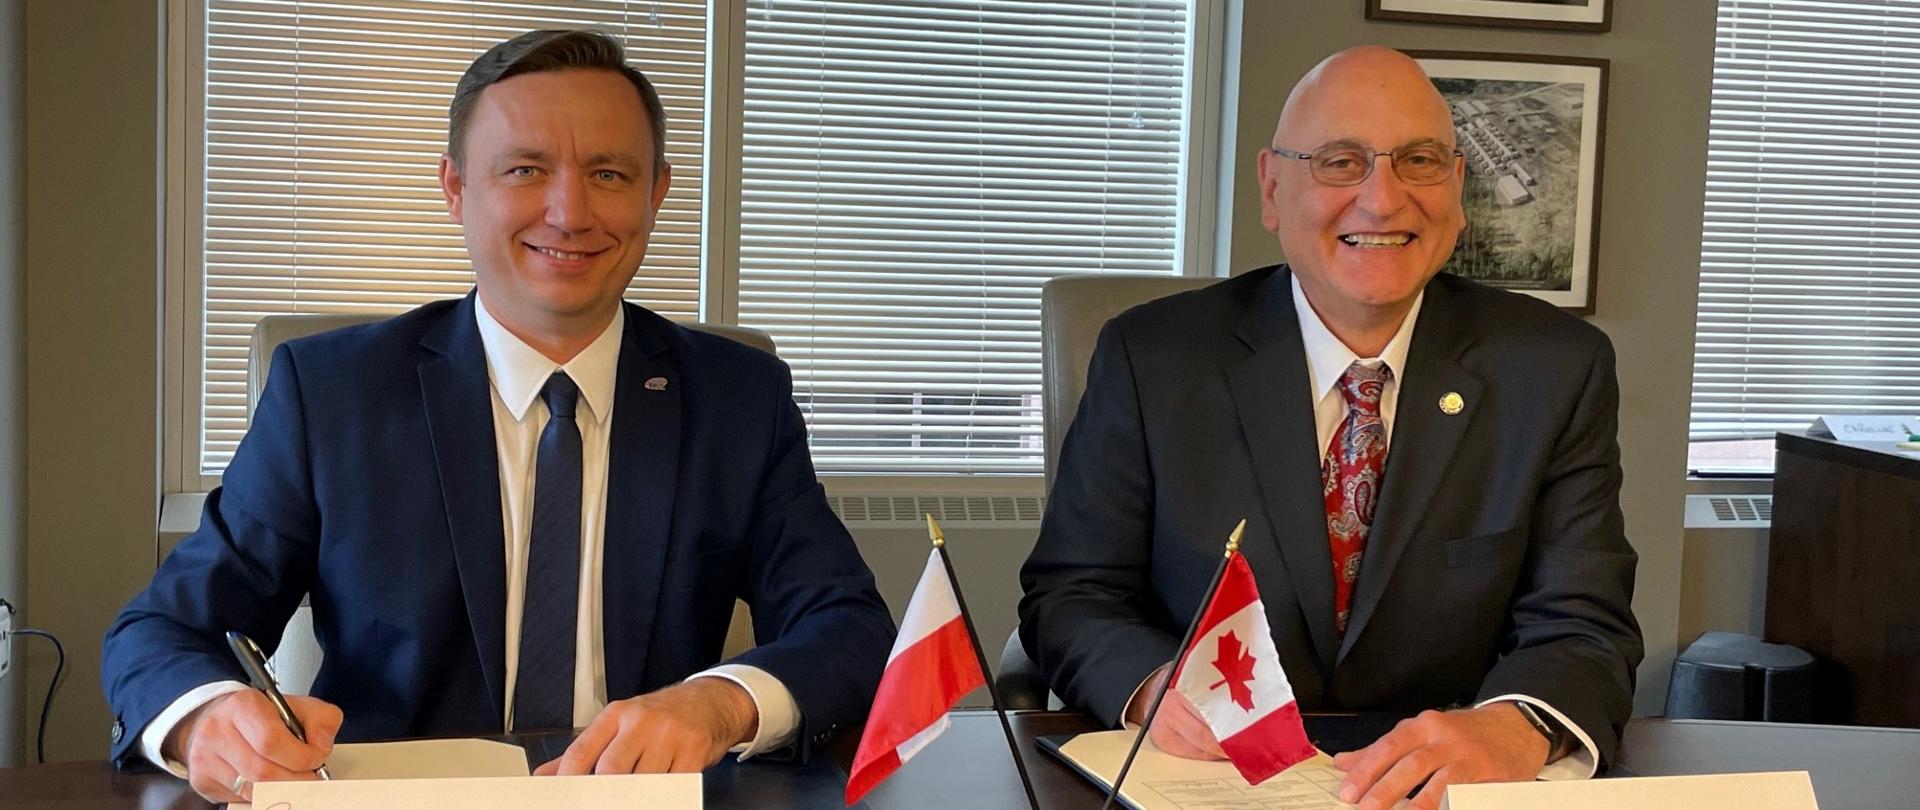 The President of the National Atomic Energy Agency and the Vice-President of the Canadian Nuclear Safety Commission sign the terms of reference of the memorandum of cooperation on small modular reactors (SMR).